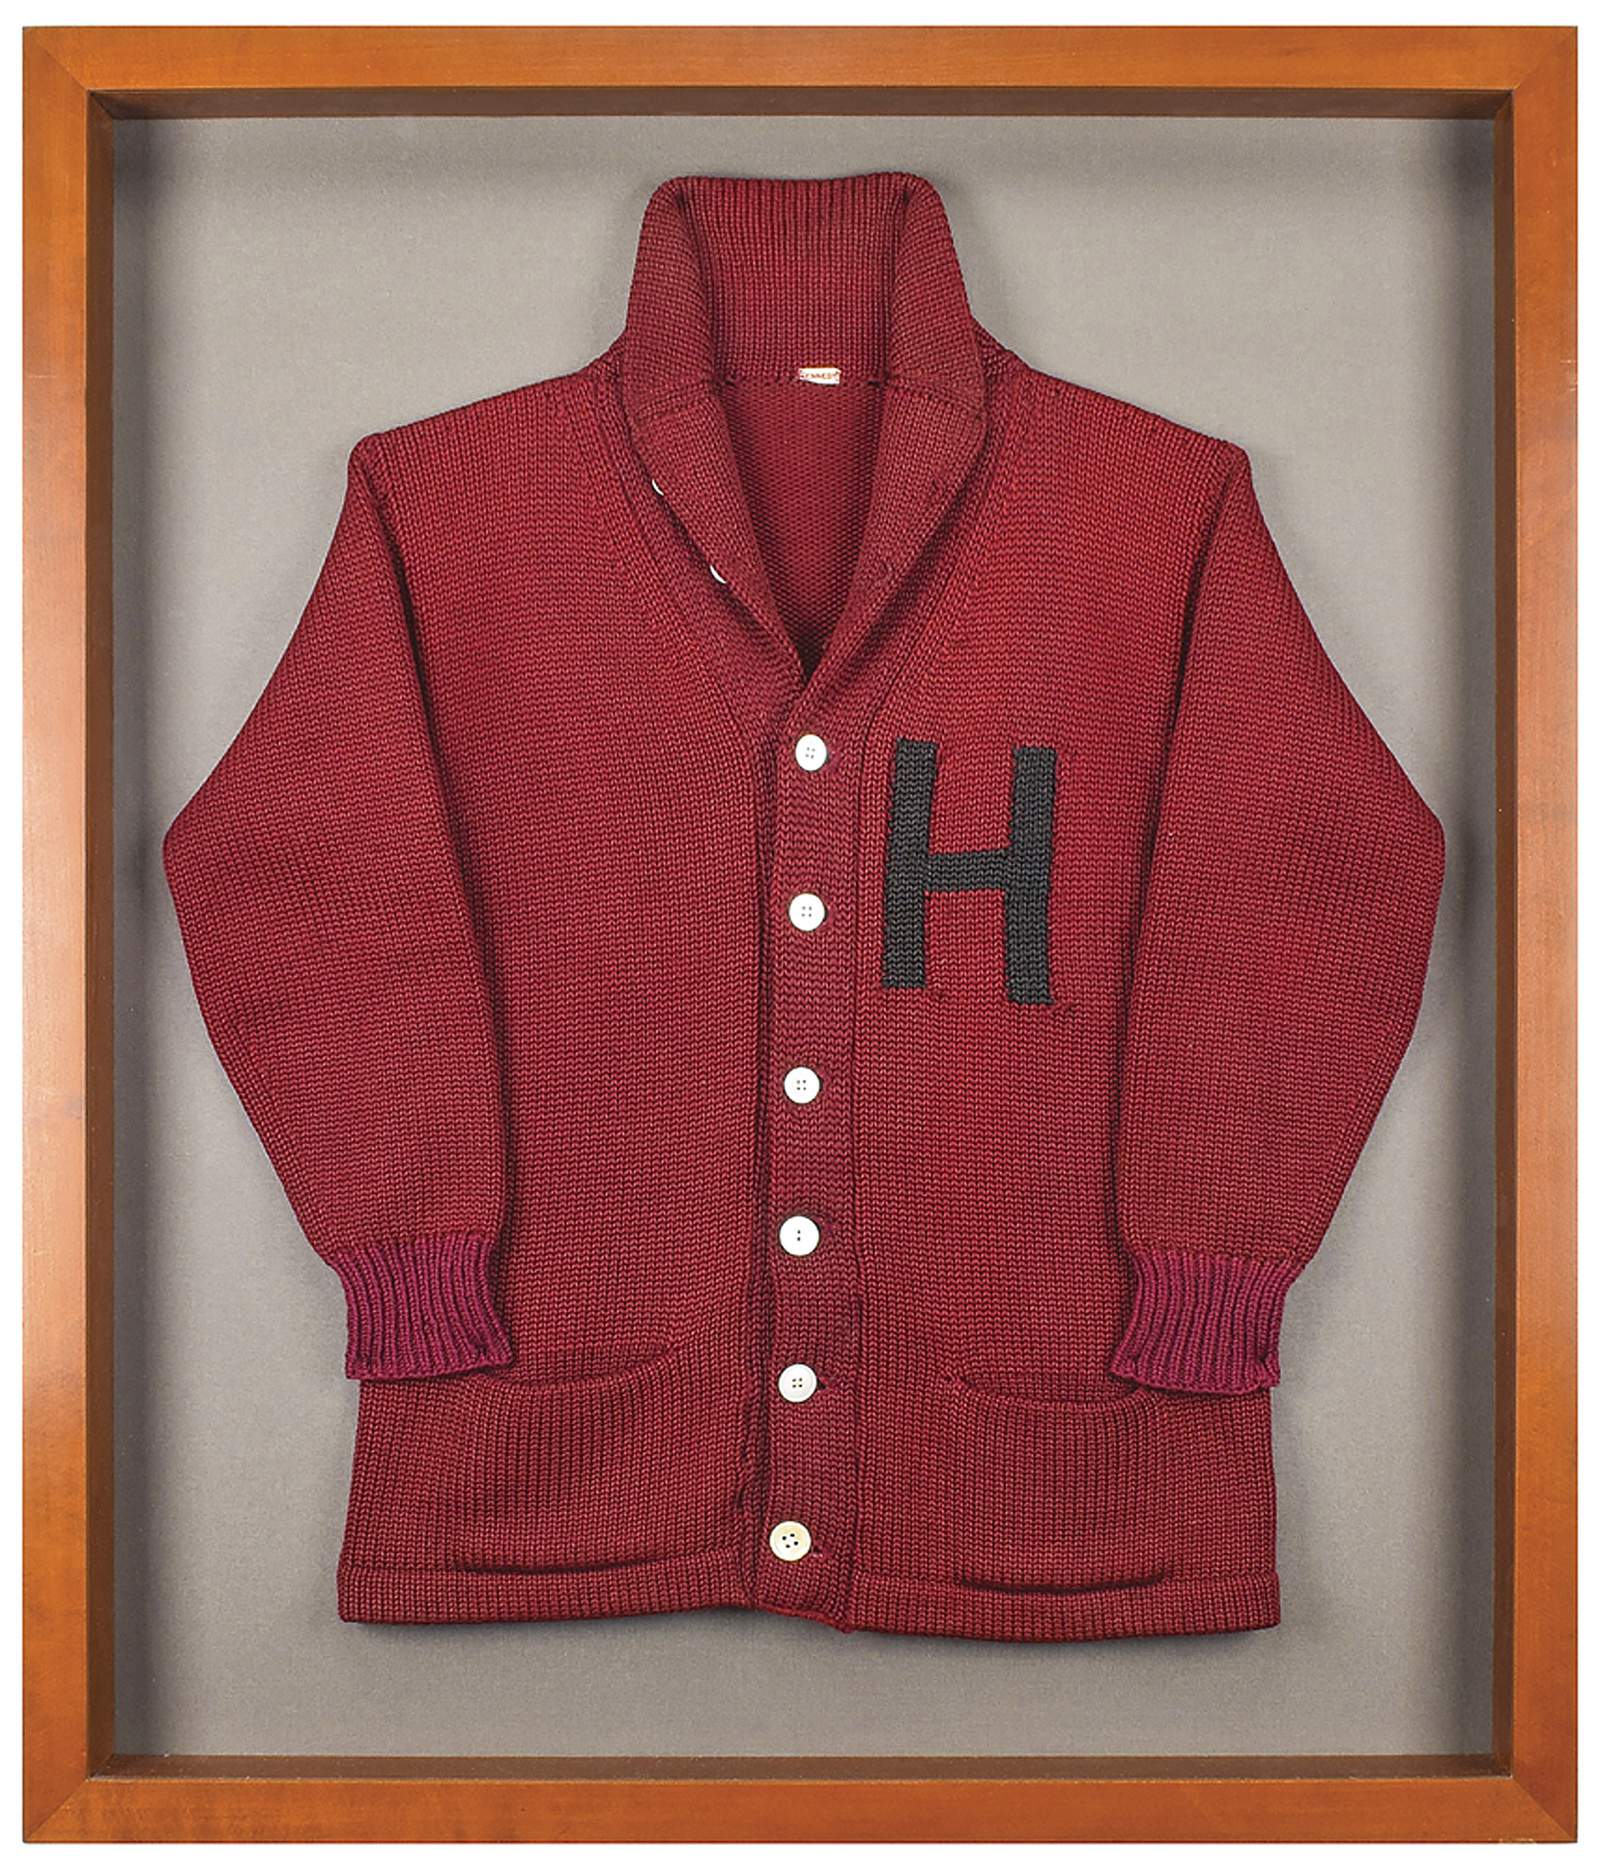 JFK’s Harvard sweater sold at auction for more than $85,000